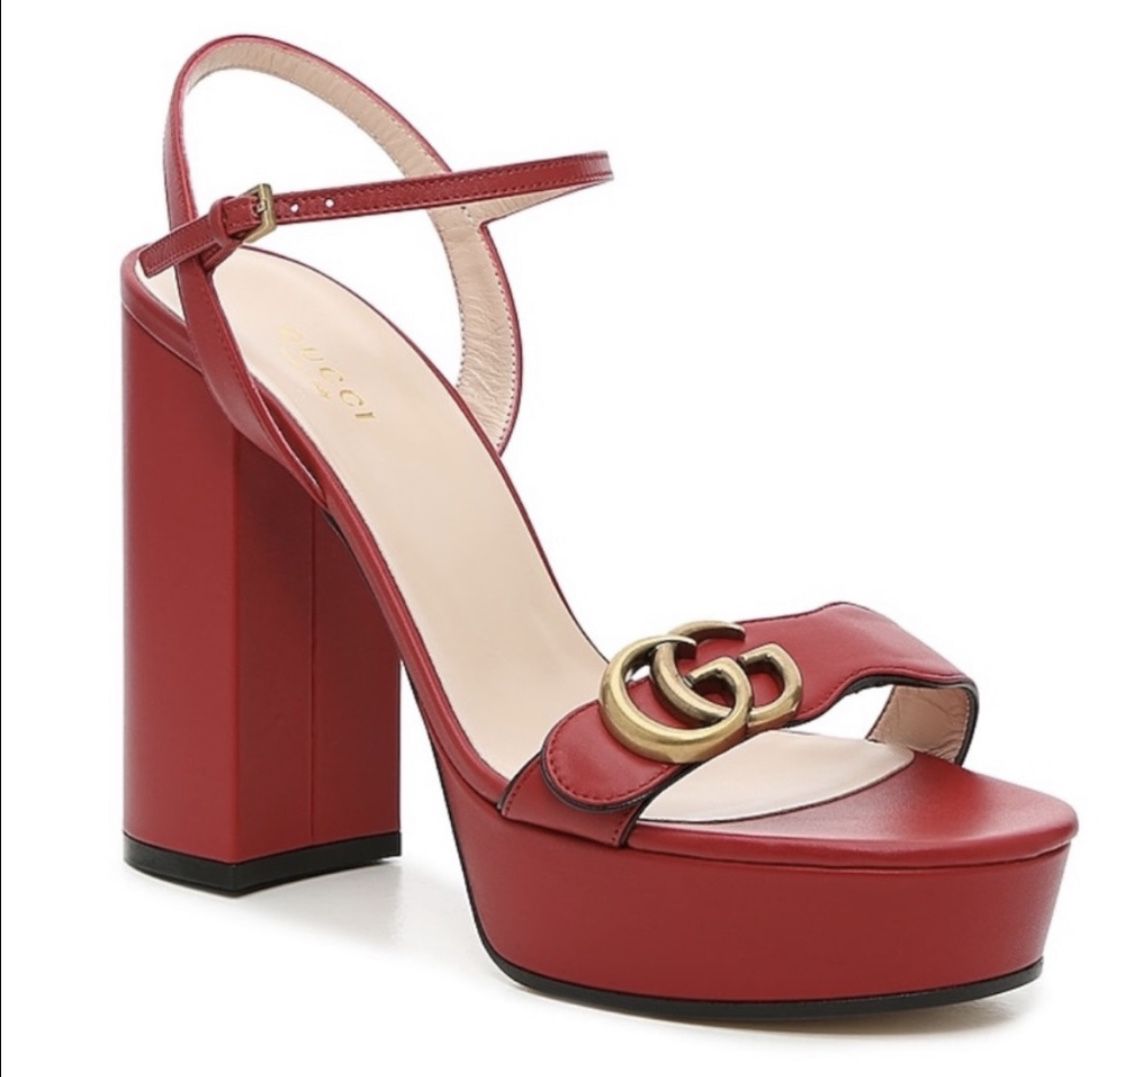 Gucci Marmont Heel Sandals - Brand New Red